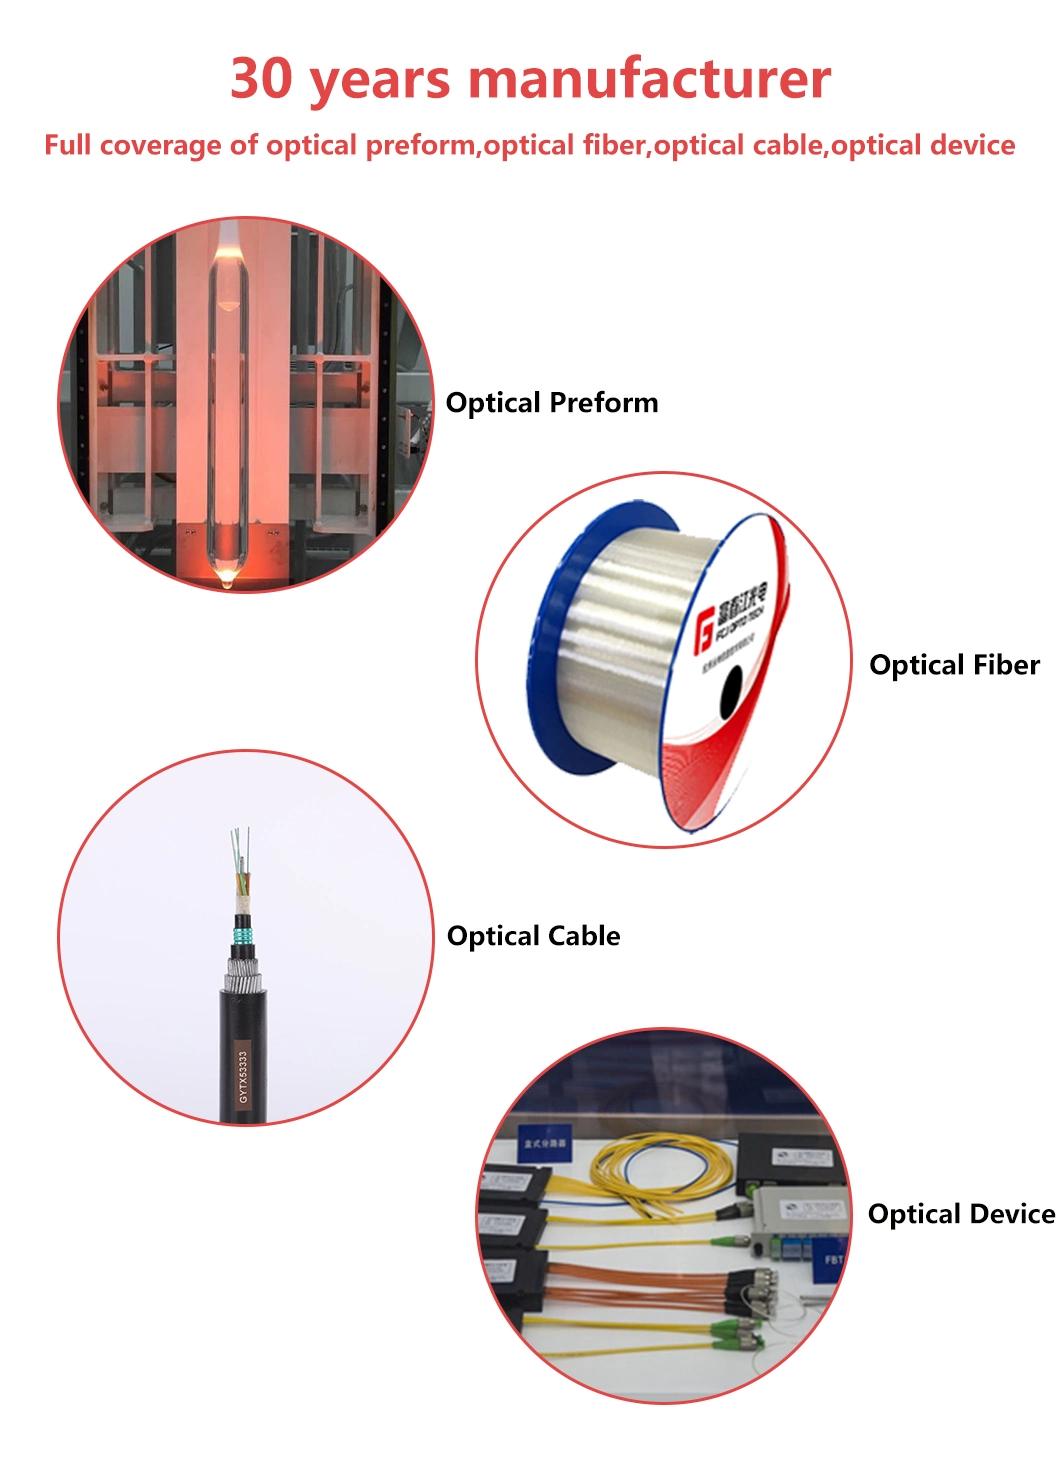 Area Networks Gcyfy Air-Blown G. 652D Communication Optic Cable